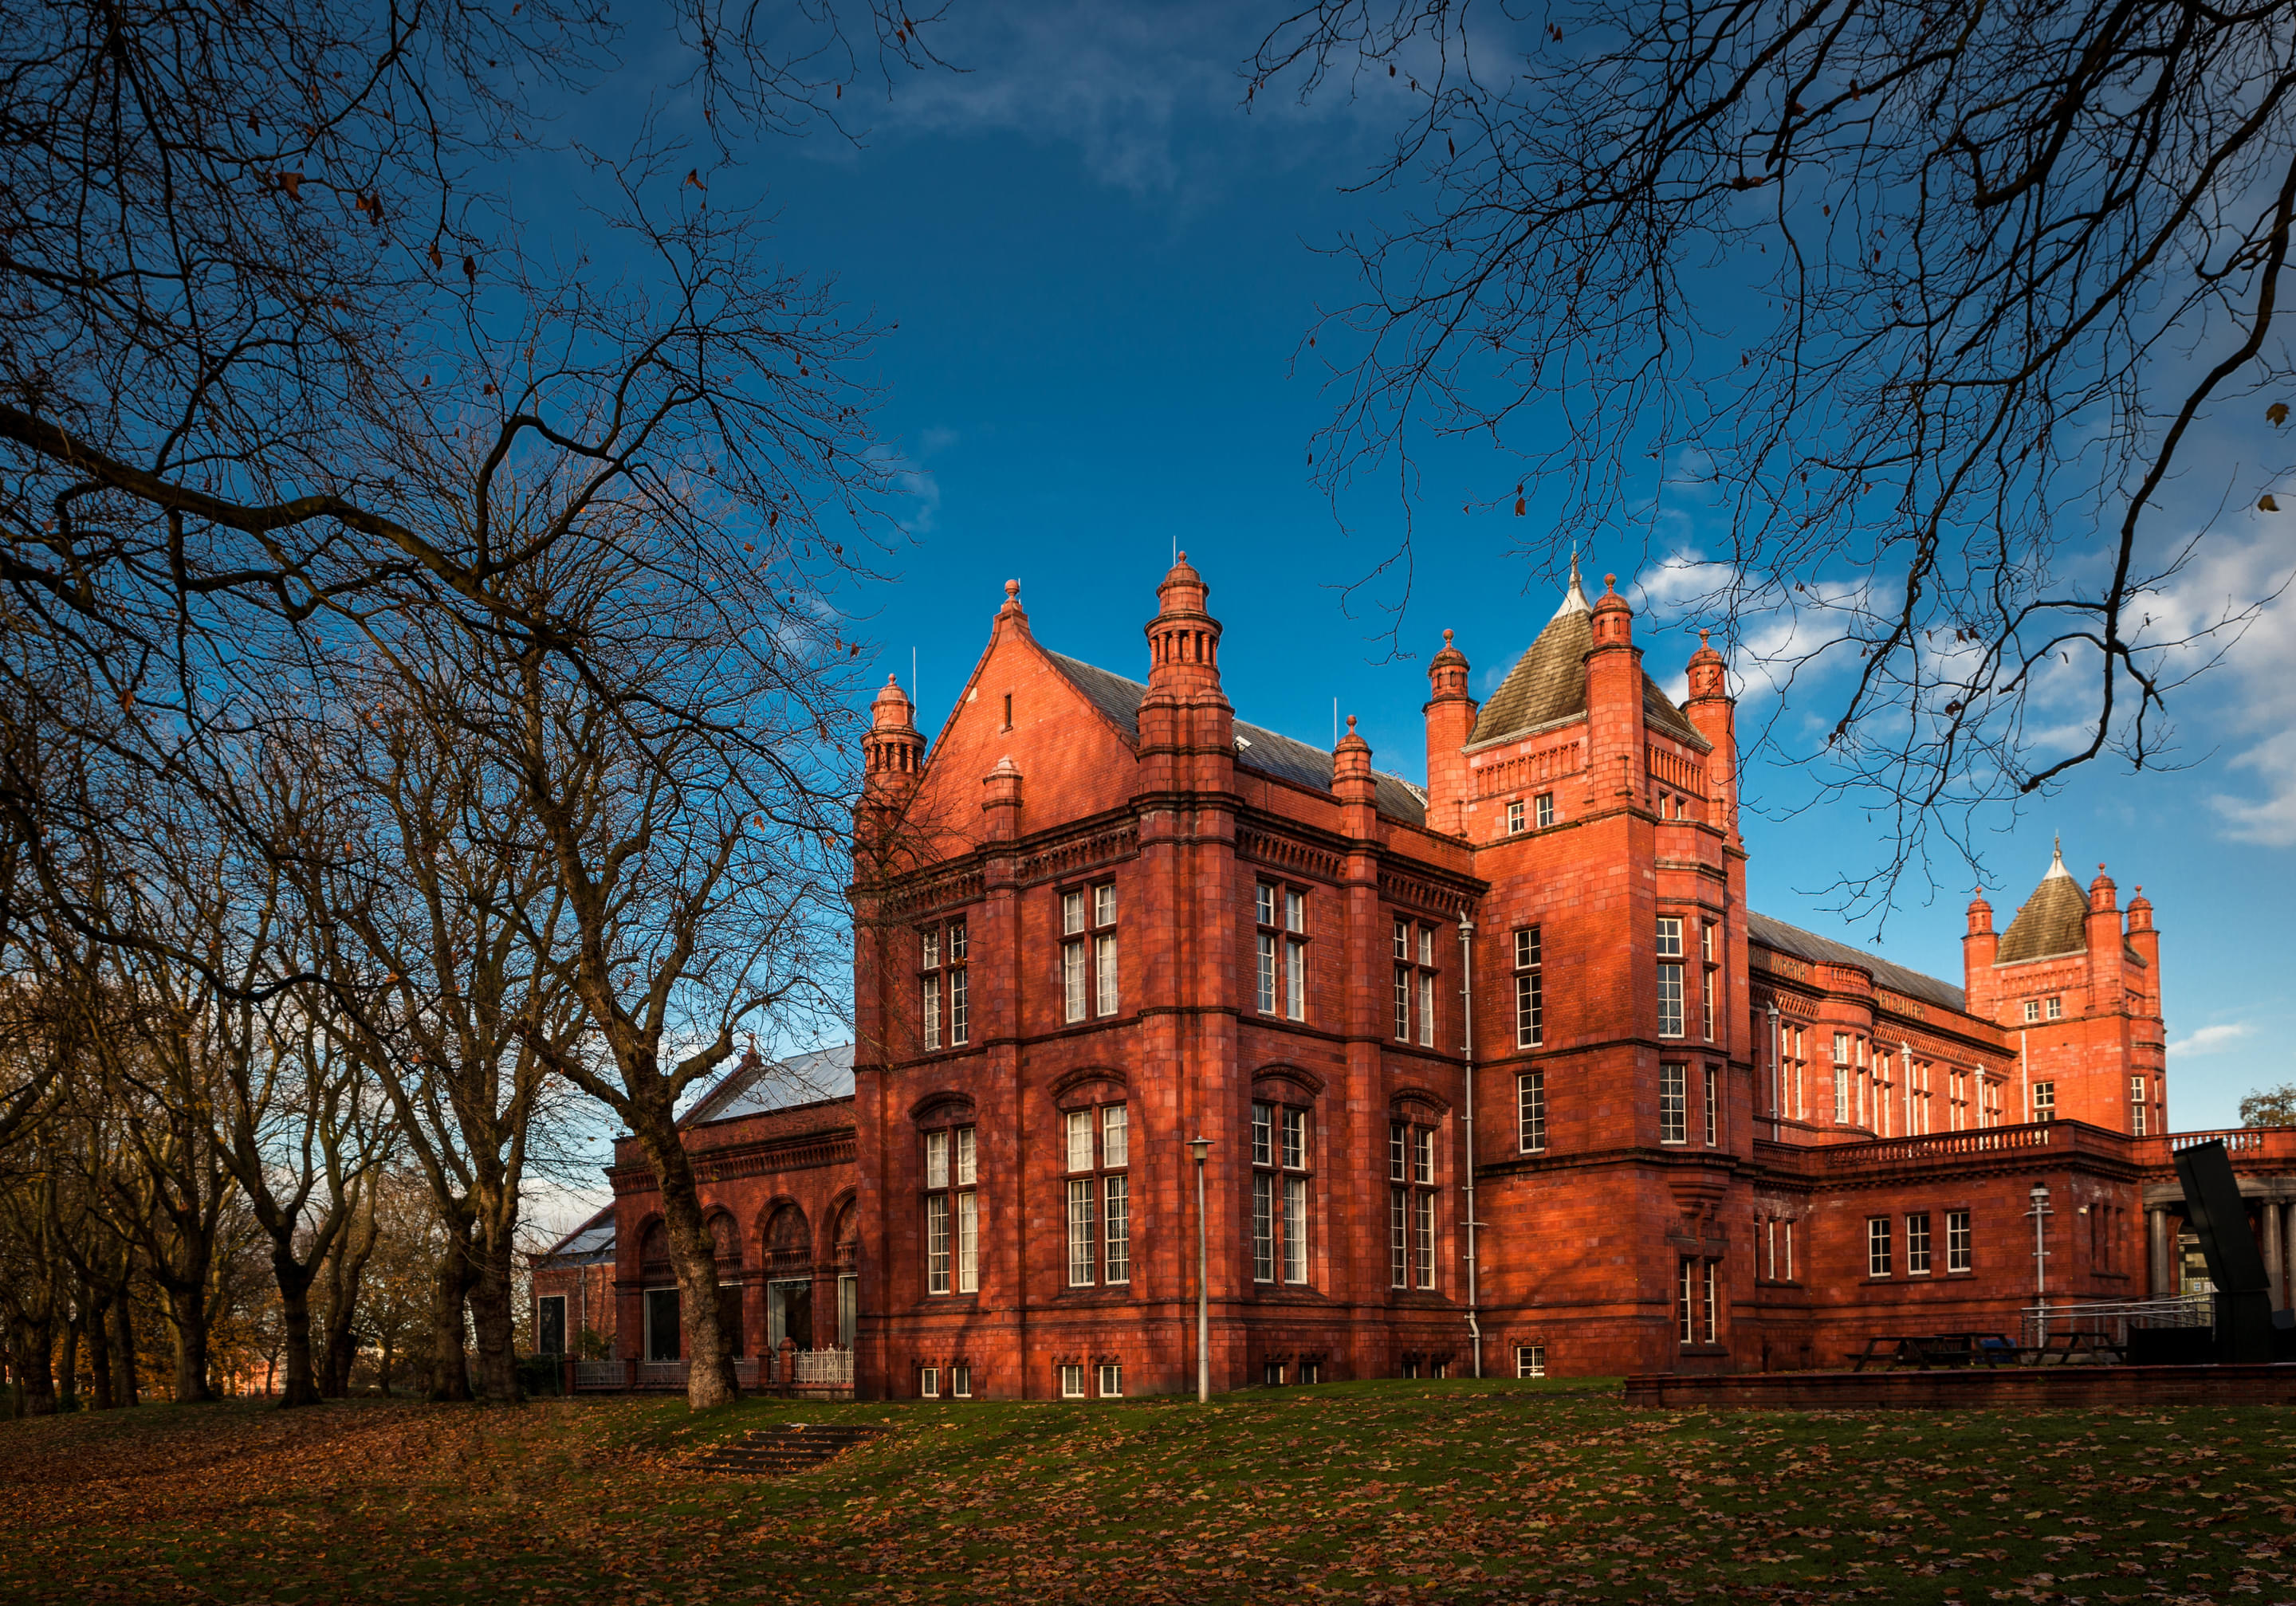 The Whitworth Manchester Overview